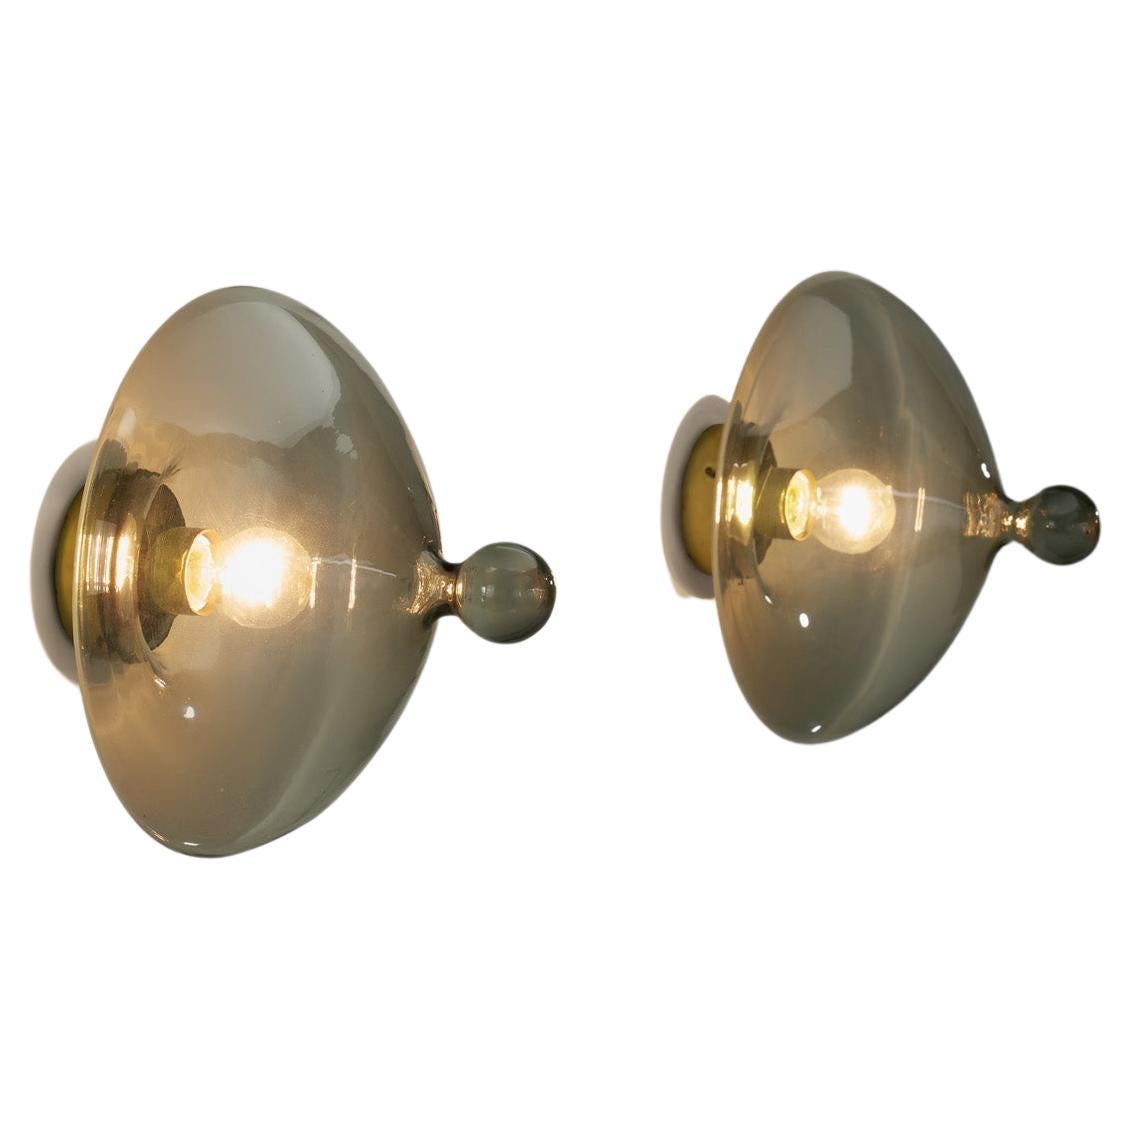 “Chaparral” Wall Lamps by Raak, The Netherlands 1960s For Sale